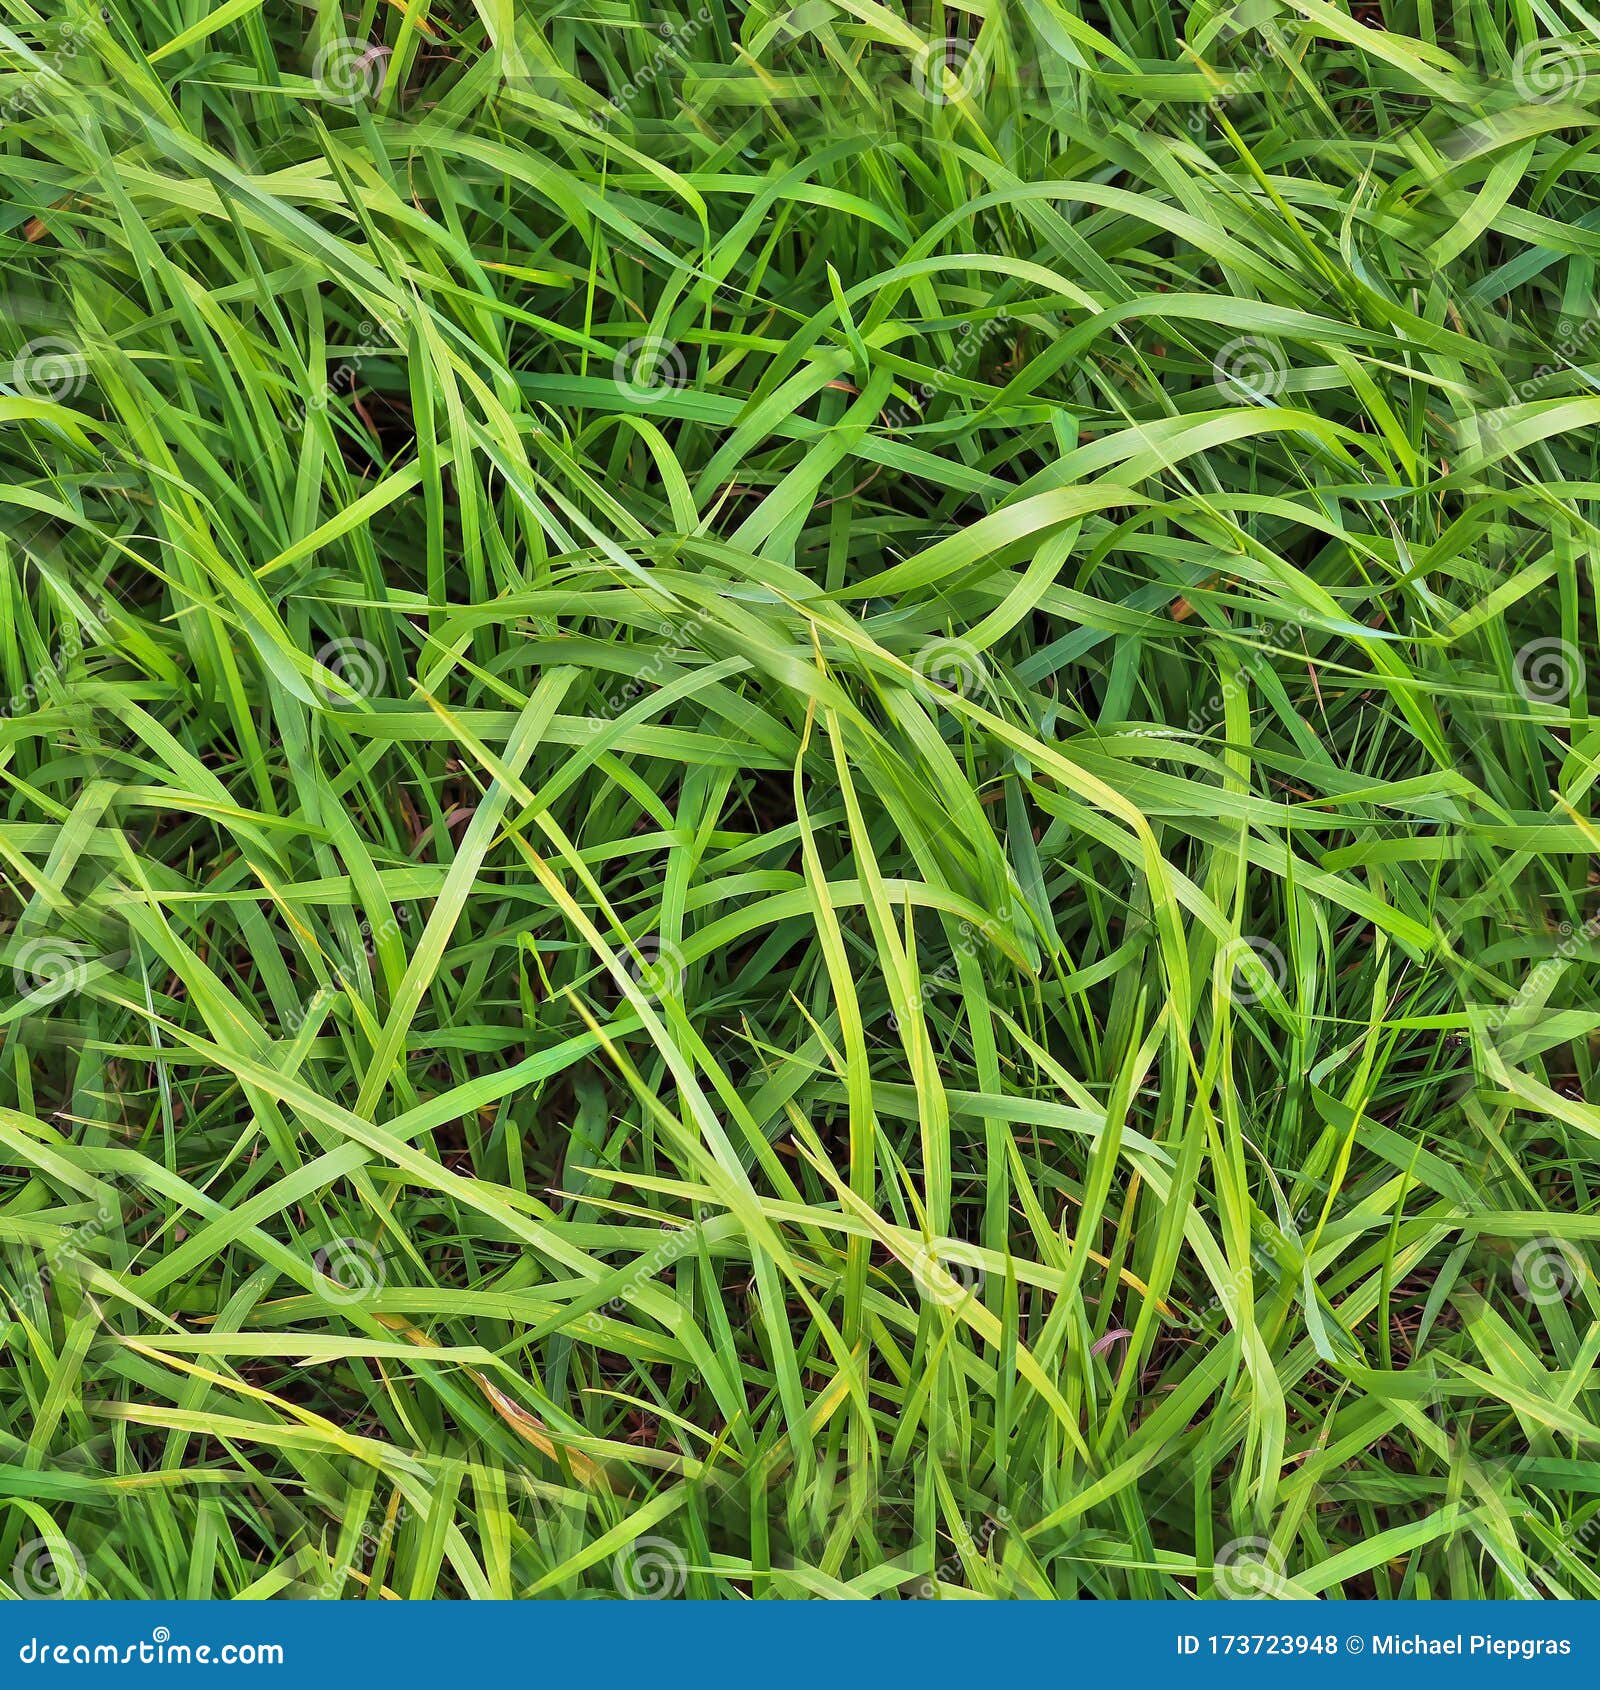 photo realistic seamless grass texture in high resolution with more than 6 megapixel